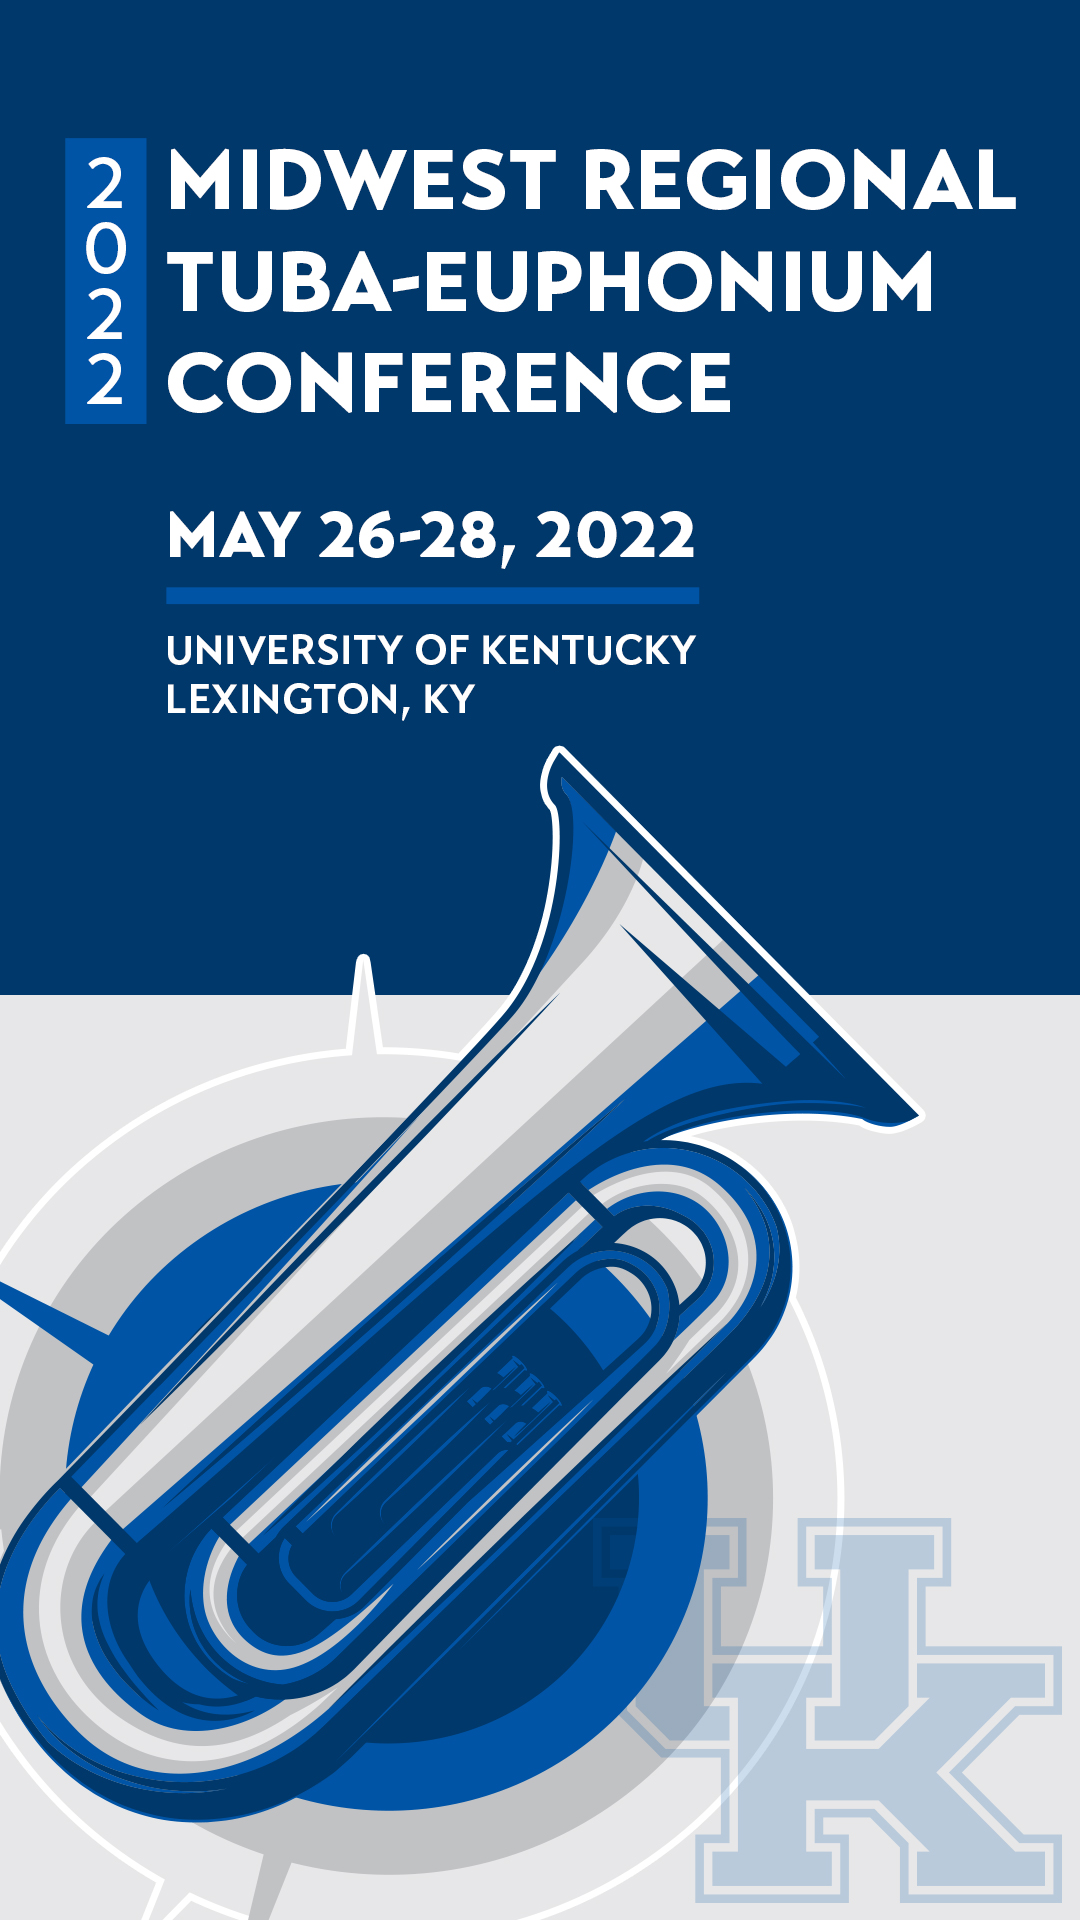 Image for Midwest Regional Tuba-Euphonium Conference